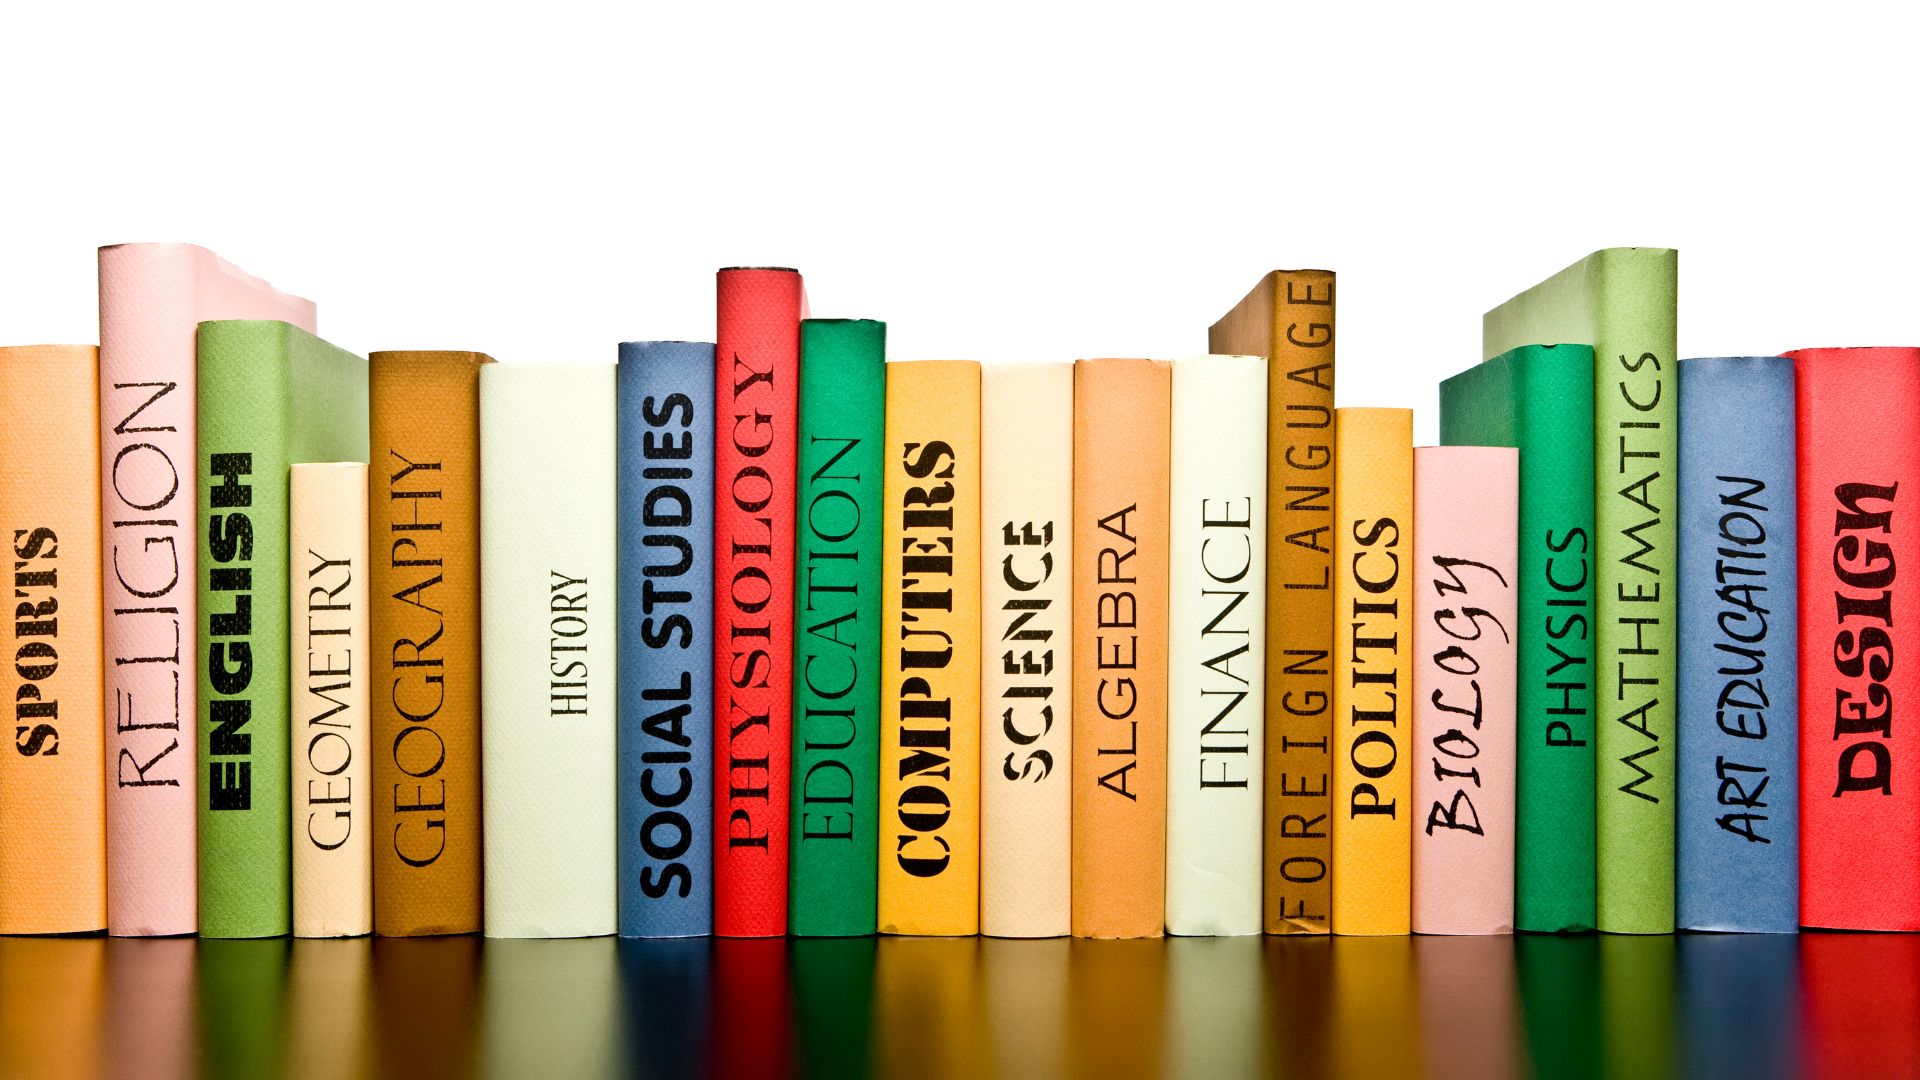 A shelf of many colorful books shows the different subjects of study